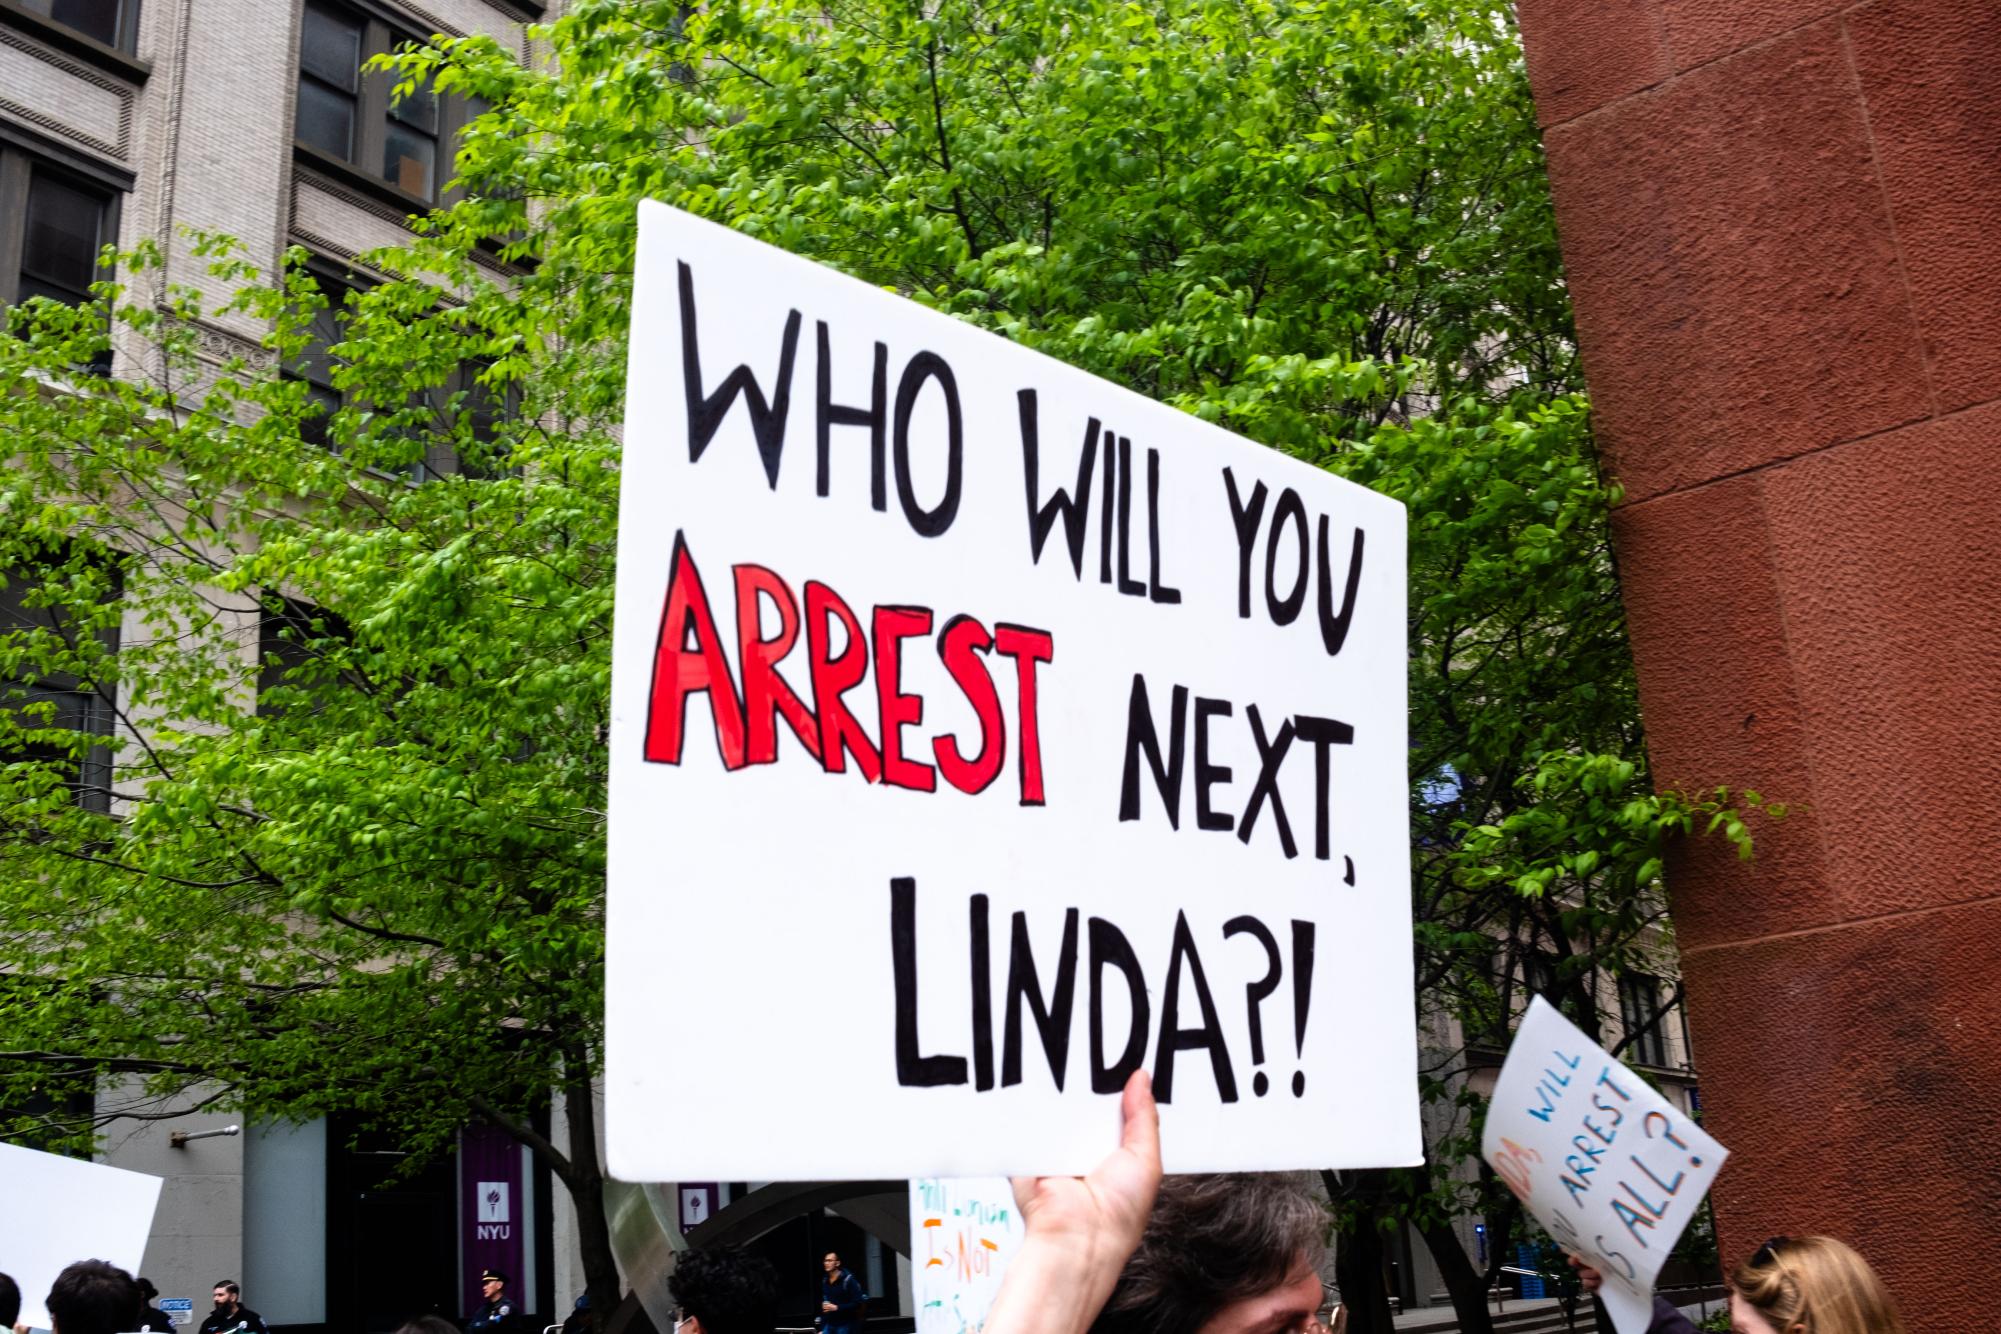 A sign that reads “Who will you arrest next, Linda?”